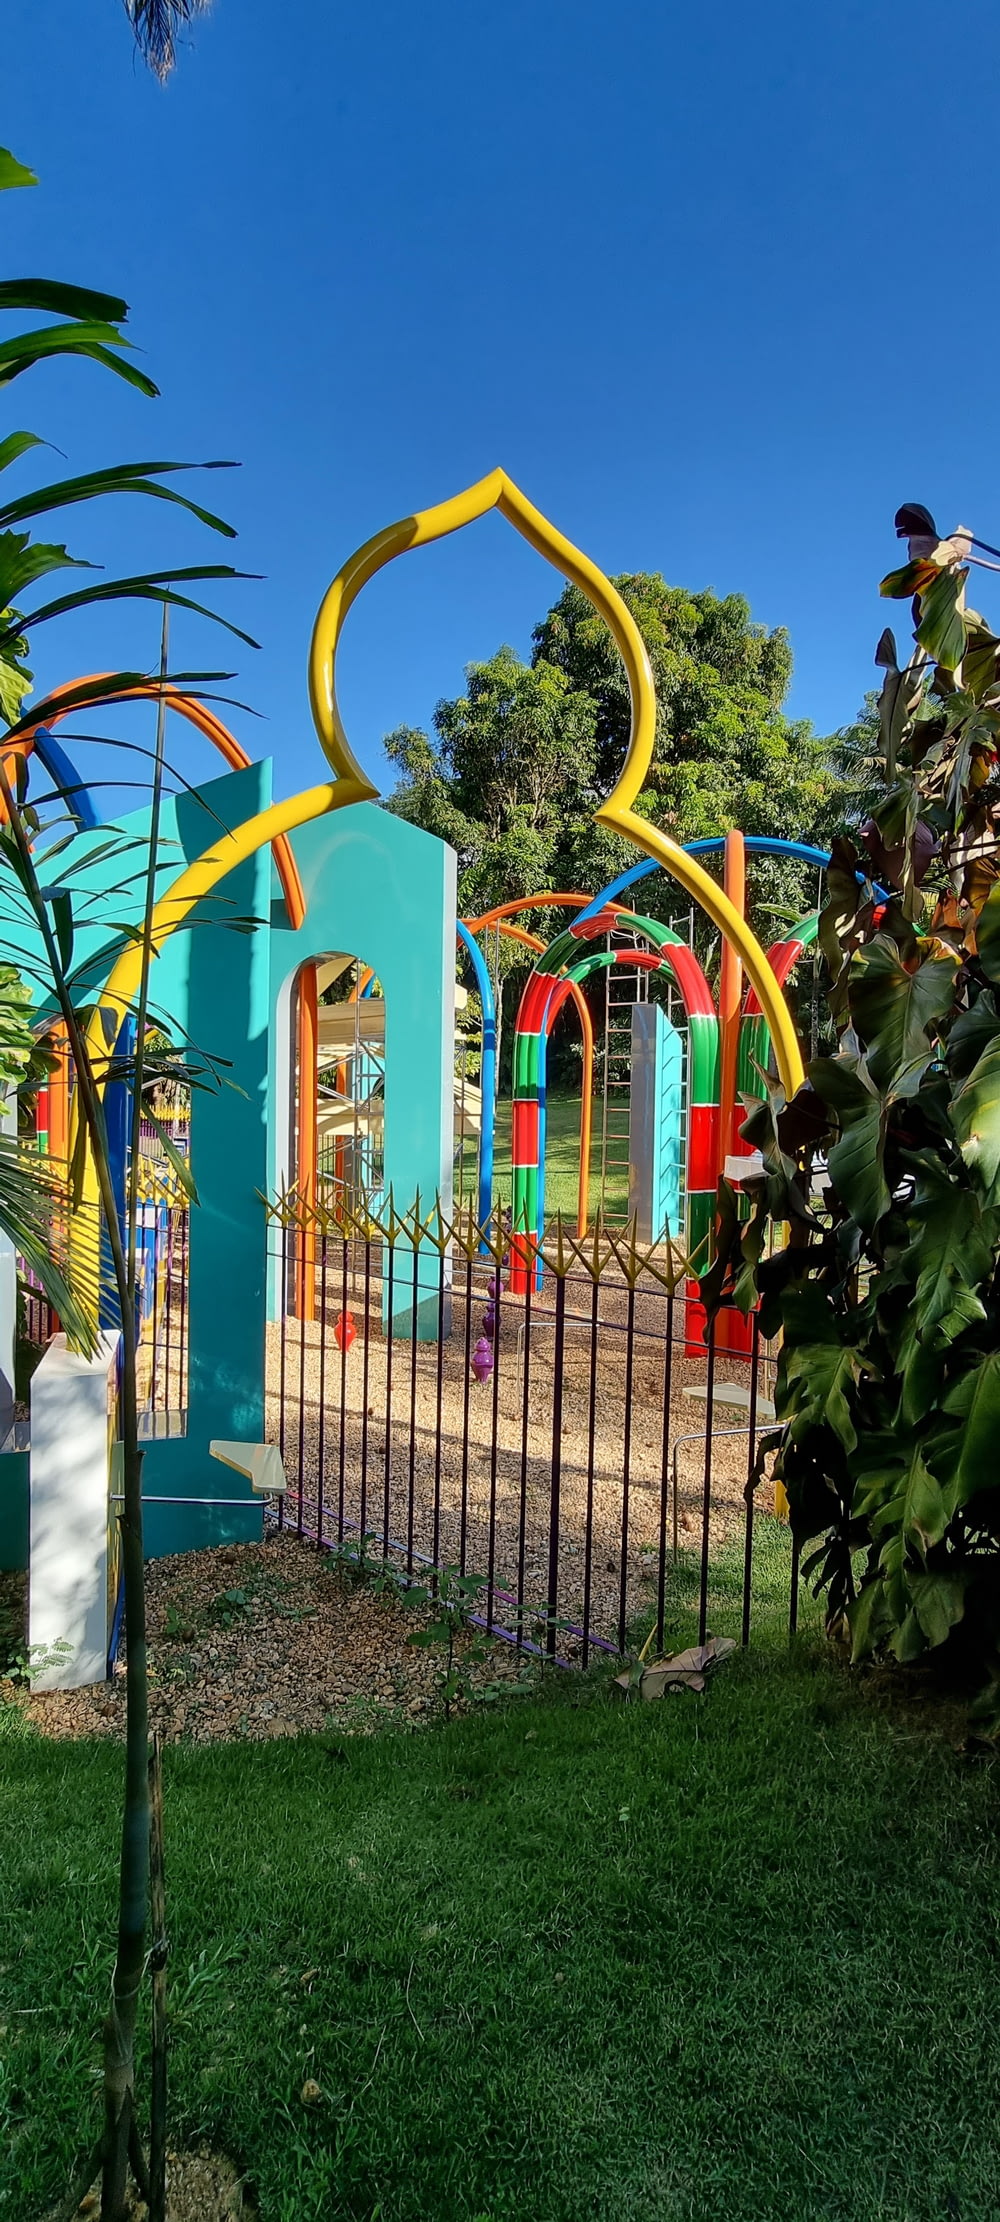 a colorful playground in a park with a metal fence